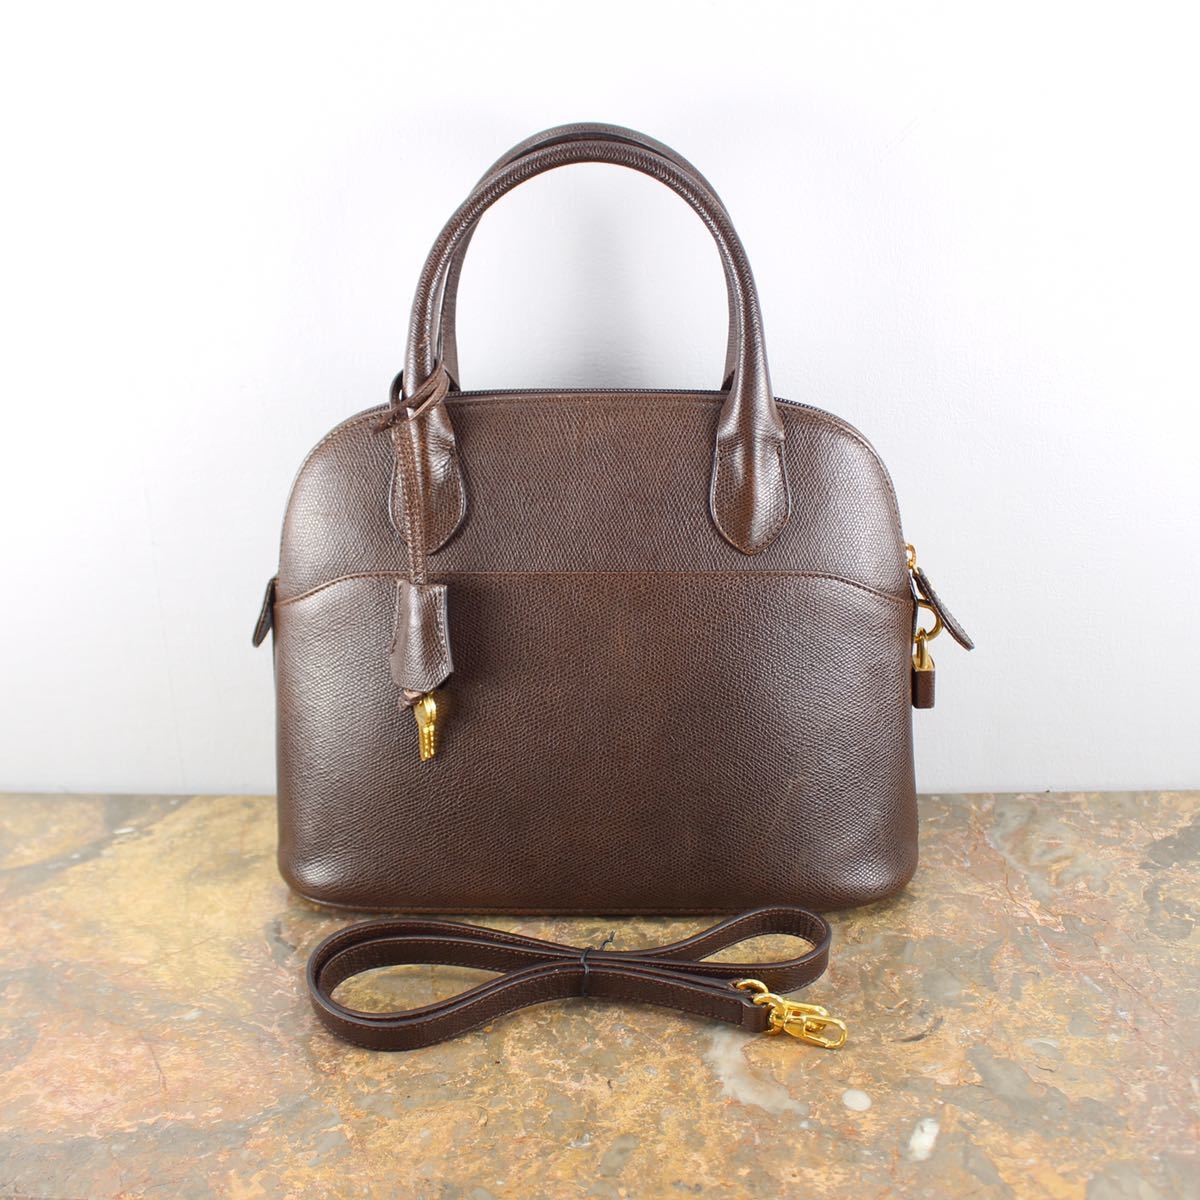 MORABITO DINA DOME TYPE LEATHER 2WAY SHOULDER BAG MADE IN ITALY ...